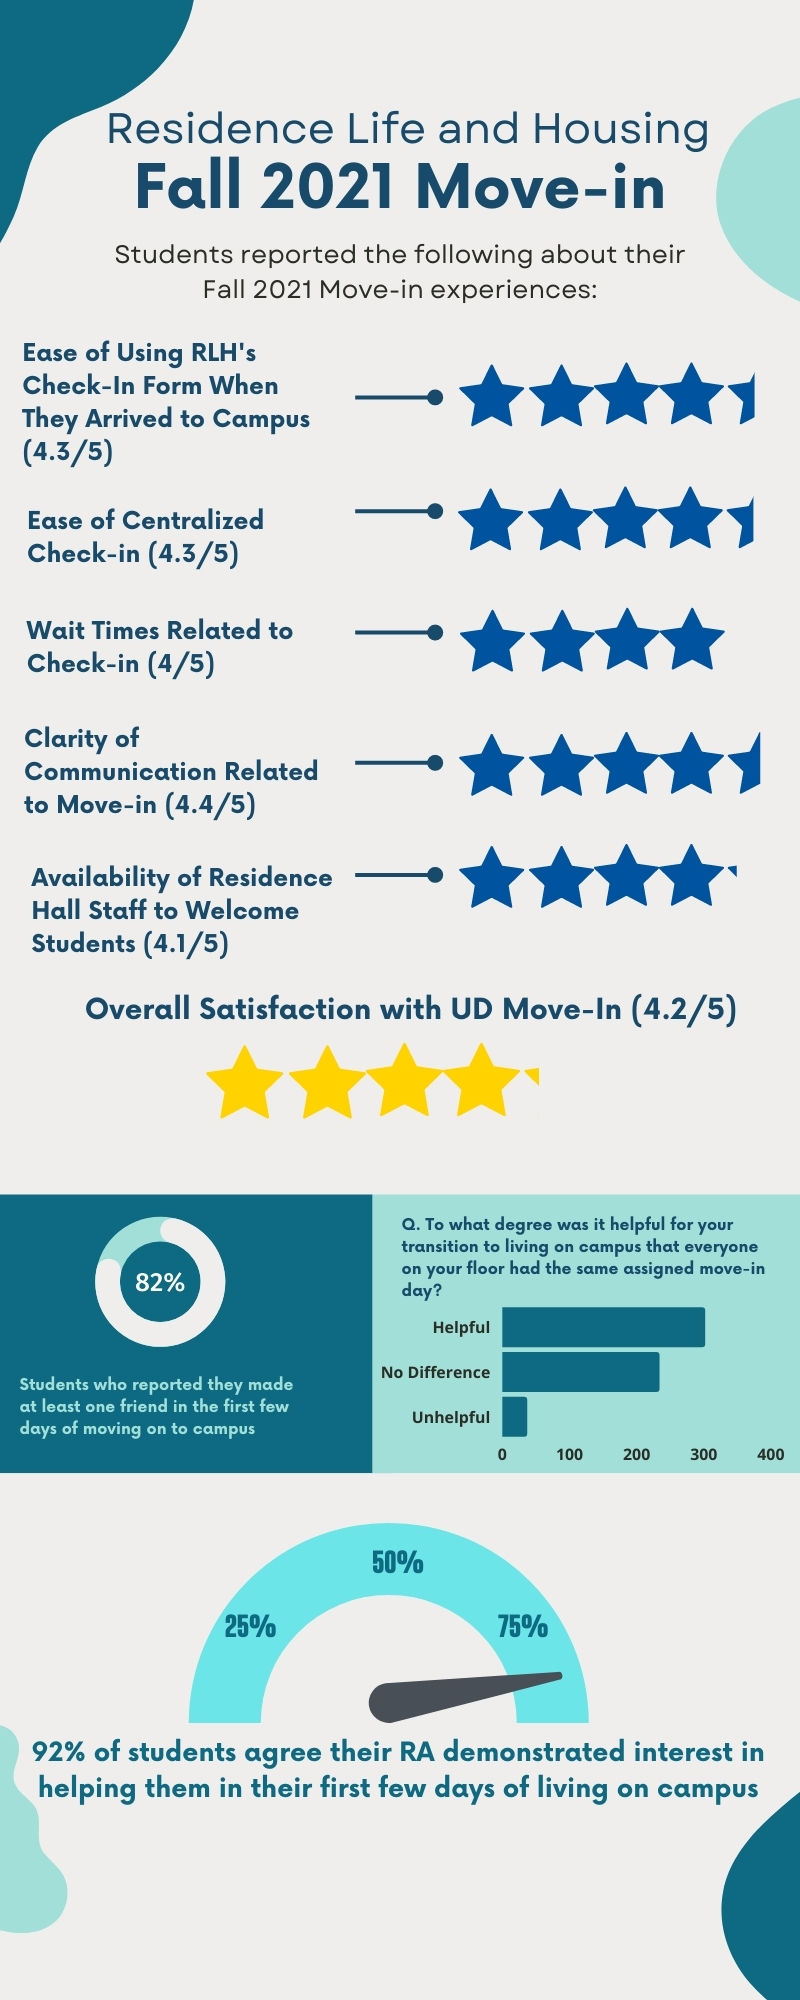 Infographic showing students were overall satisfied (4.2 out of 5 stars) with 2021 Move-In and 84% reported they made at least one friend within the first few days of moving in